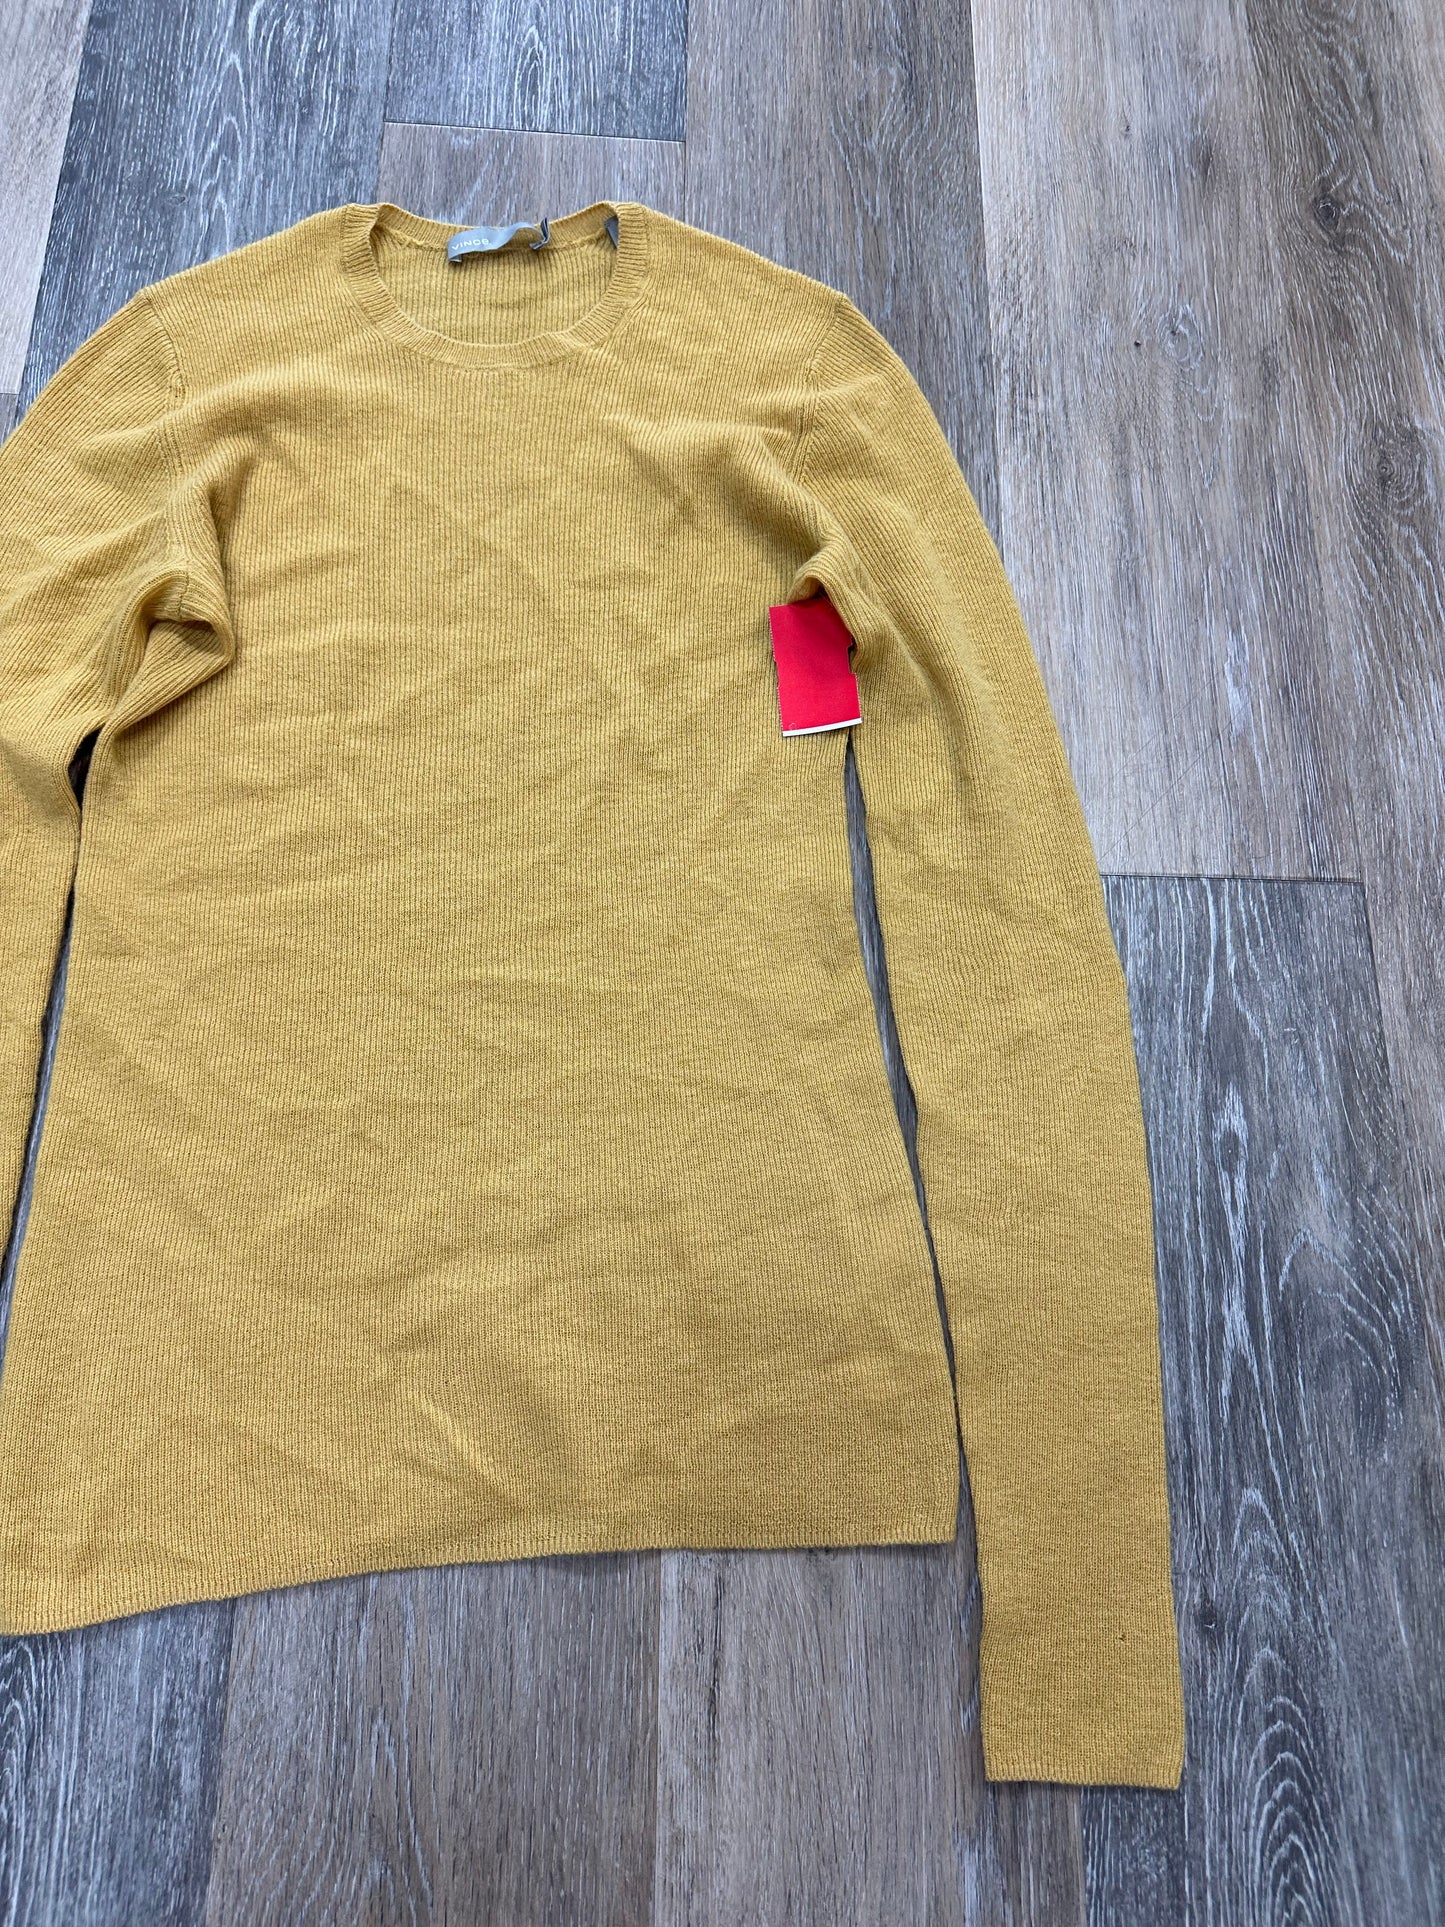 Yellow Sweater Cashmere Vince, Size S